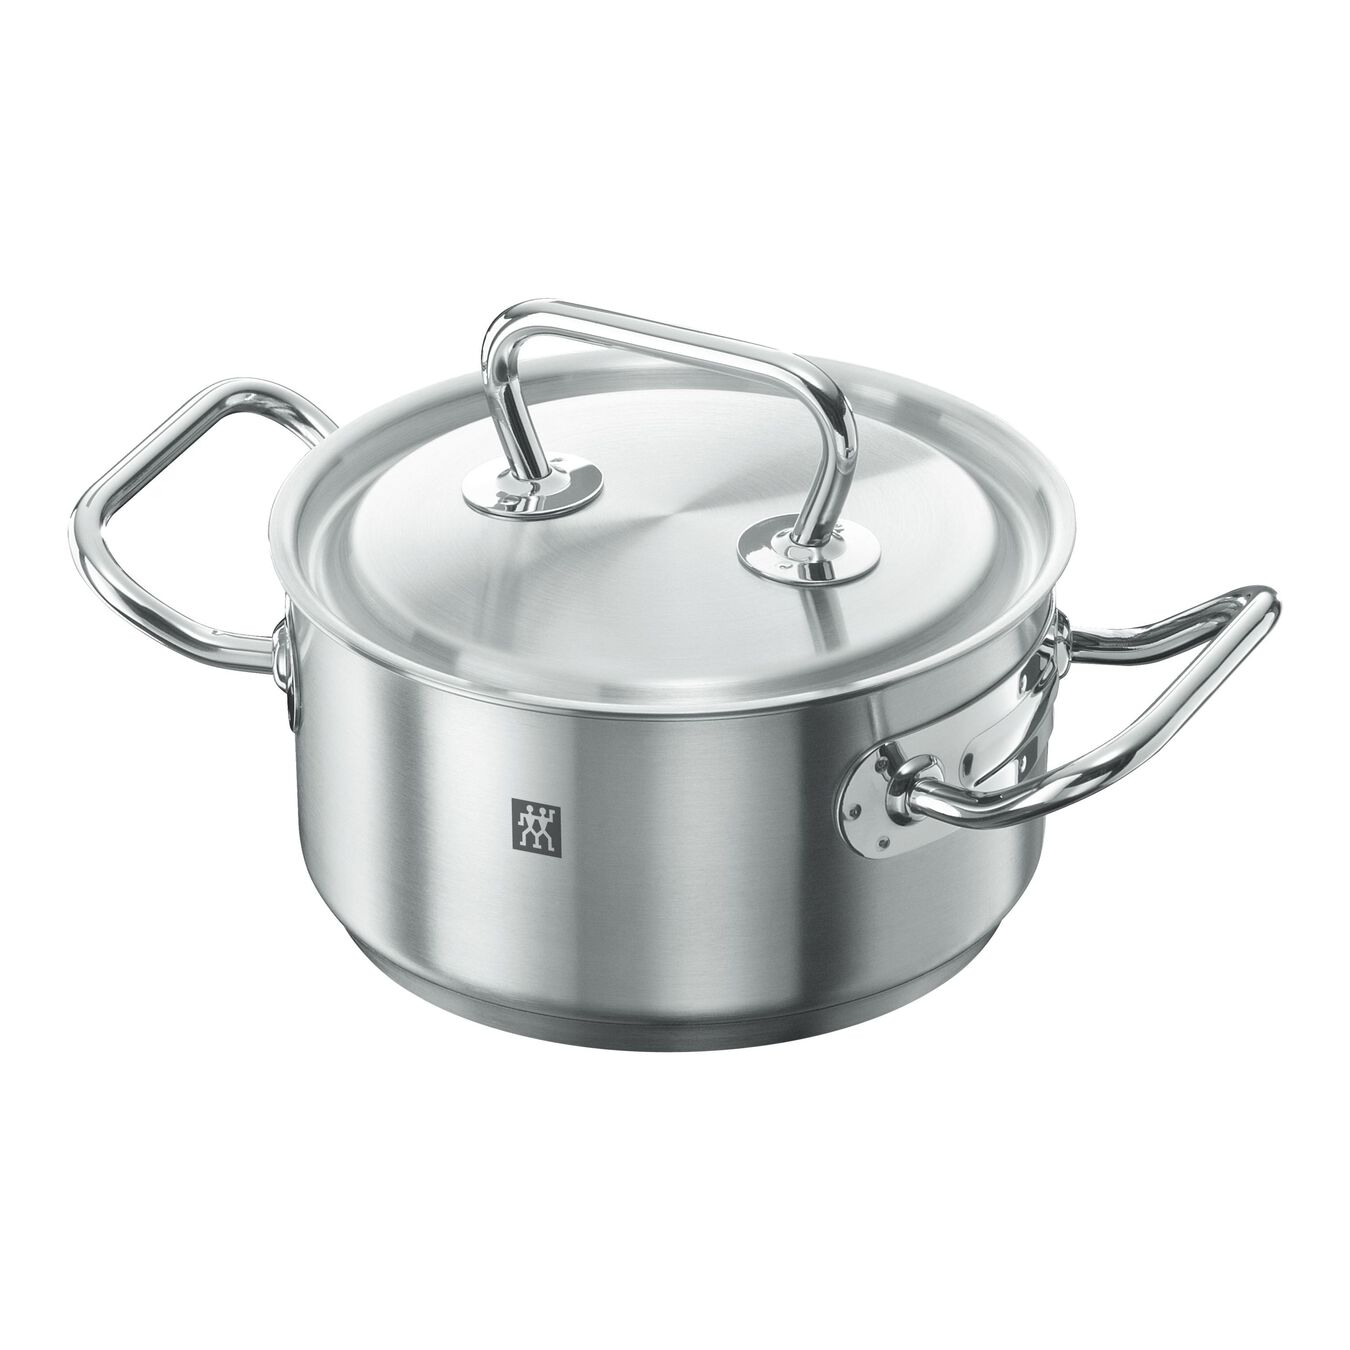 16 cm 18/10 Stainless Steel Stew pot,,large 1